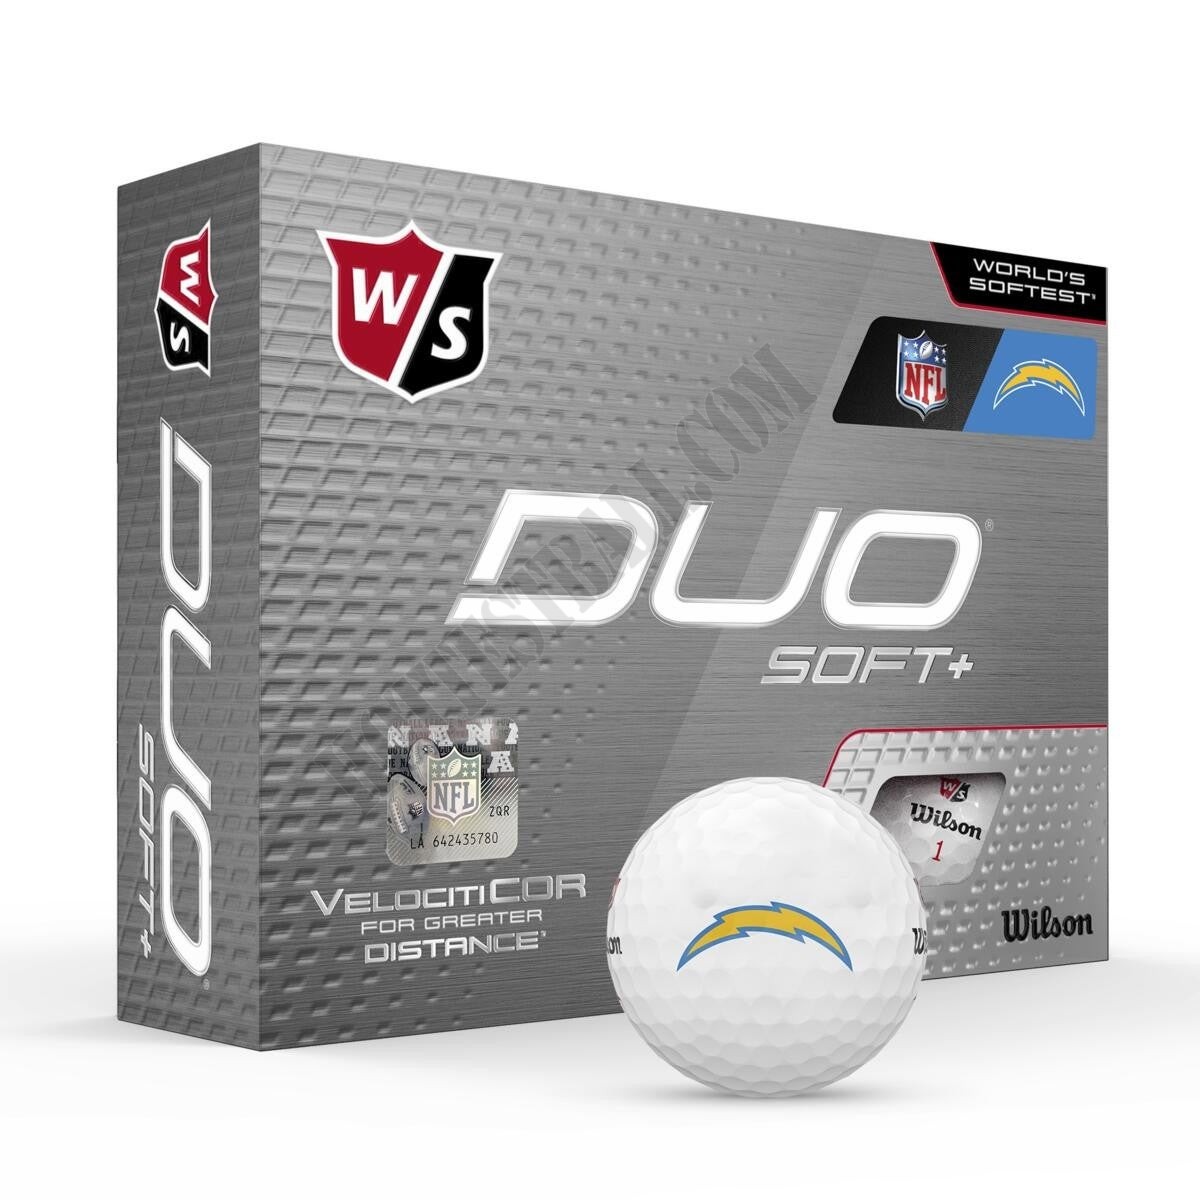 Duo Soft+ NFL Golf Balls - Los Angeles Chargers - Wilson Discount Store - Duo Soft+ NFL Golf Balls - Los Angeles Chargers - Wilson Discount Store